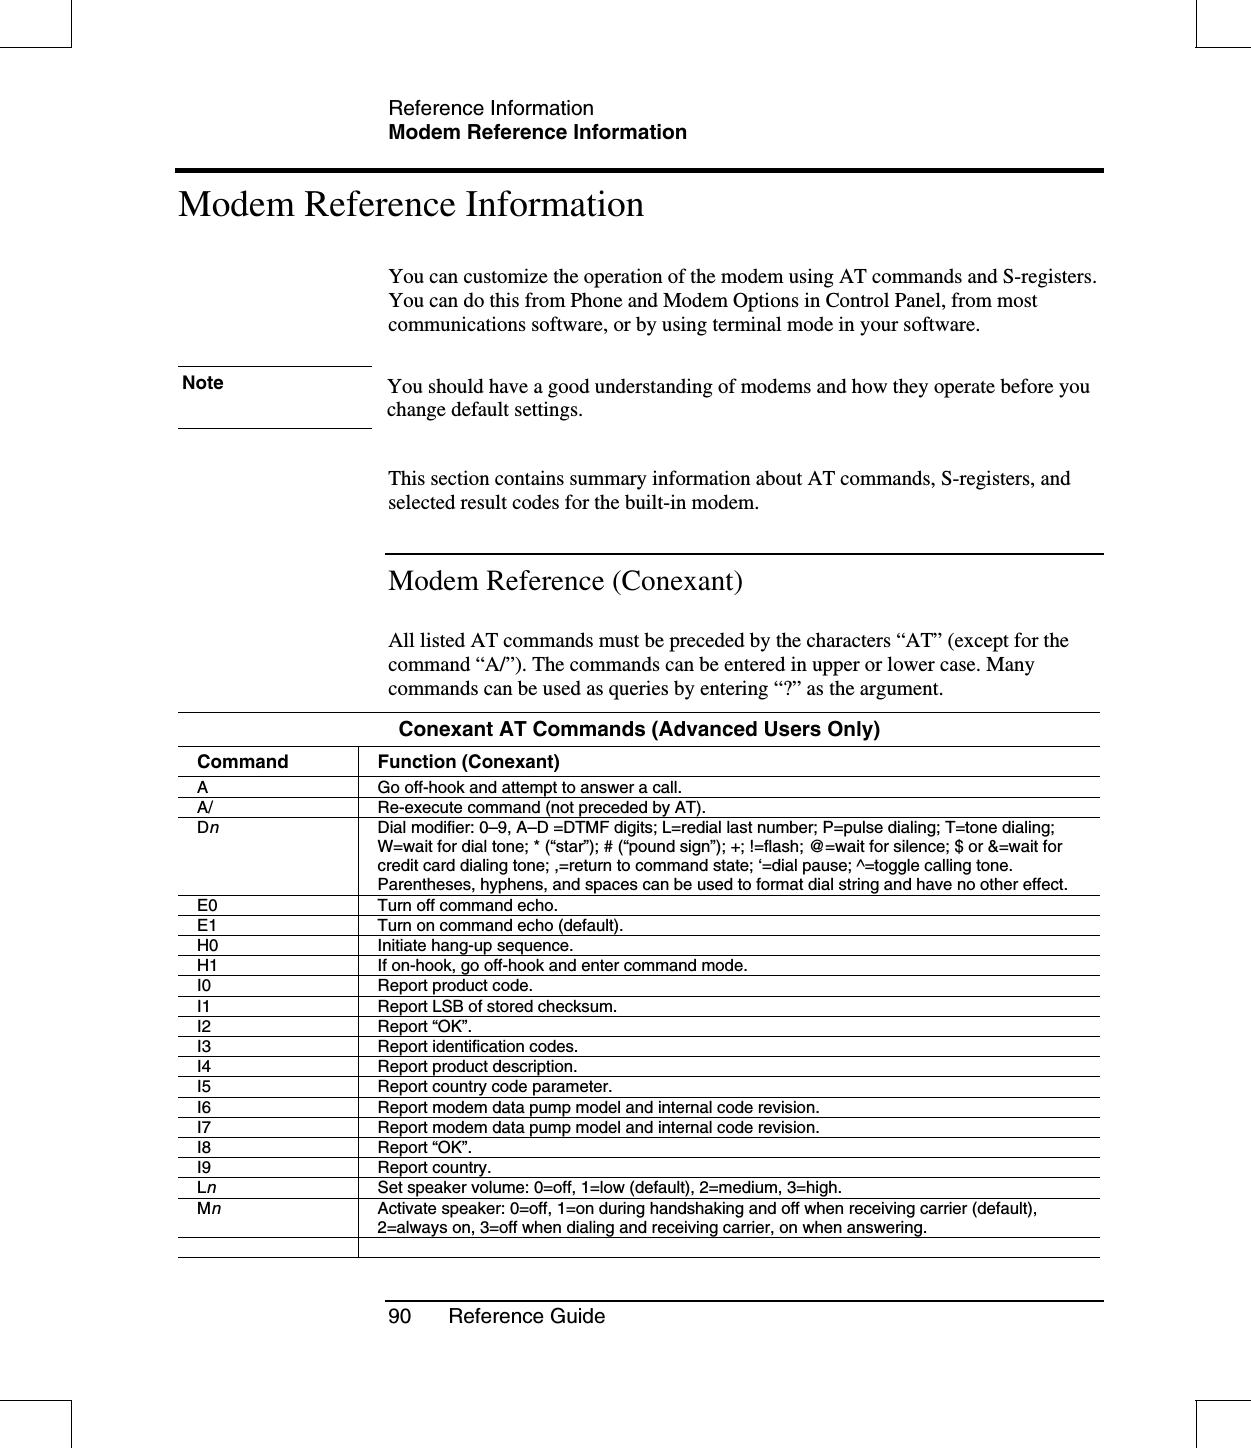 Reference InformationModem Reference Information90 Reference GuideModem Reference InformationYou can customize the operation of the modem using AT commands and S-registers.You can do this from Phone and Modem Options in Control Panel, from mostcommunications software, or by using terminal mode in your software.Note You should have a good understanding of modems and how they operate before youchange default settings.This section contains summary information about AT commands, S-registers, andselected result codes for the built-in modem.Modem Reference (Conexant)All listed AT commands must be preceded by the characters “AT”(except for thecommand “A/”). The commands can be entered in upper or lower case. Manycommands can be used as queries by entering “?”as the argument.Conexant AT Commands (Advanced Users Only)Command Function (Conexant)A Go off-hook and attempt to answer a call.A/ Re-execute command (not preceded by AT).DnDial modifier: 0–9, A–D =DTMF digits; L=redial last number; P=pulse dialing; T=tone dialing;W=wait for dial tone; * (“star”); # (“pound sign”); +; !=flash; @=wait for silence; $ or &amp;=wait forcredit card dialing tone; ,=return to command state; ‘=dial pause; ^=toggle calling tone.Parentheses, hyphens, and spaces can be used to format dial string and have no other effect.E0 Turn off command echo.E1 Turn on command echo (default).H0 Initiate hang-up sequence.H1 If on-hook, go off-hook and enter command mode.I0 Report product code.I1 Report LSB of stored checksum.I2 Report “OK”.I3 Report identification codes.I4 Report product description.I5 Report country code parameter.I6 Report modem data pump model and internal code revision.I7 Report modem data pump model and internal code revision.I8 Report “OK”.I9 Report country.LnSet speaker volume: 0=off, 1=low (default), 2=medium, 3=high.MnActivate speaker: 0=off, 1=on during handshaking and off when receiving carrier (default),2=always on, 3=off when dialing and receiving carrier, on when answering.